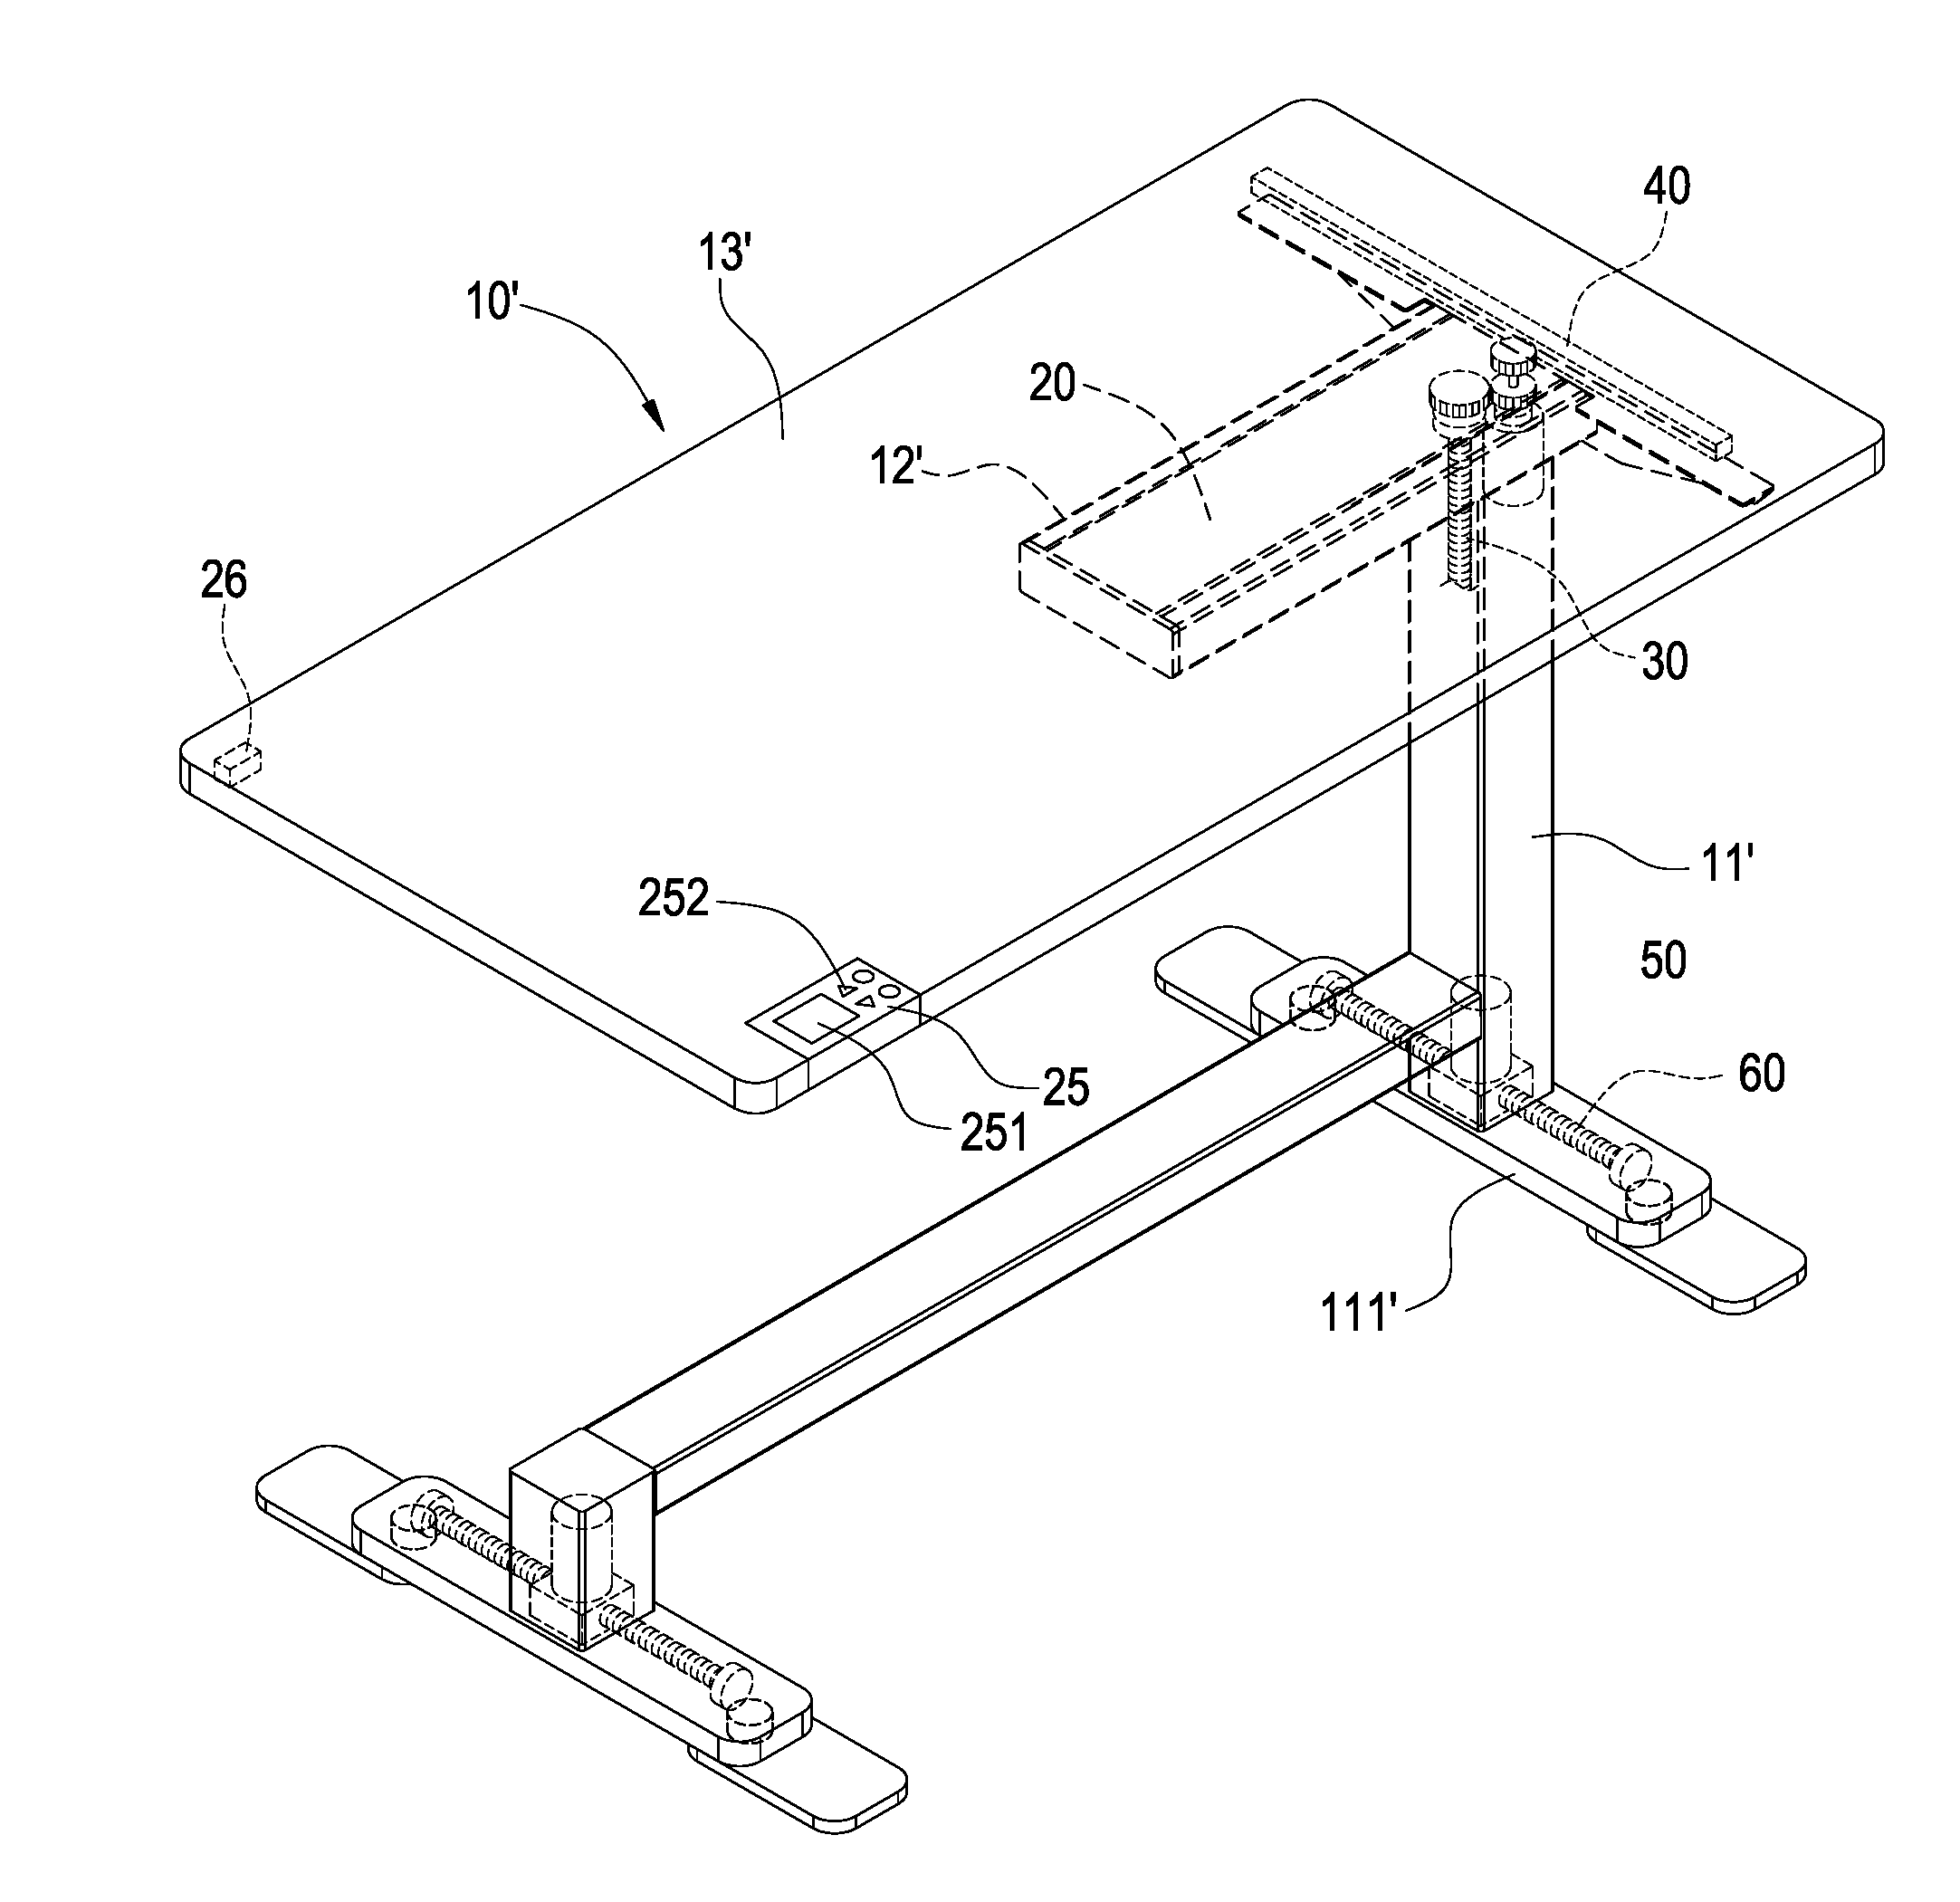 Electrical adjustable table and control method for electrical adjustable table